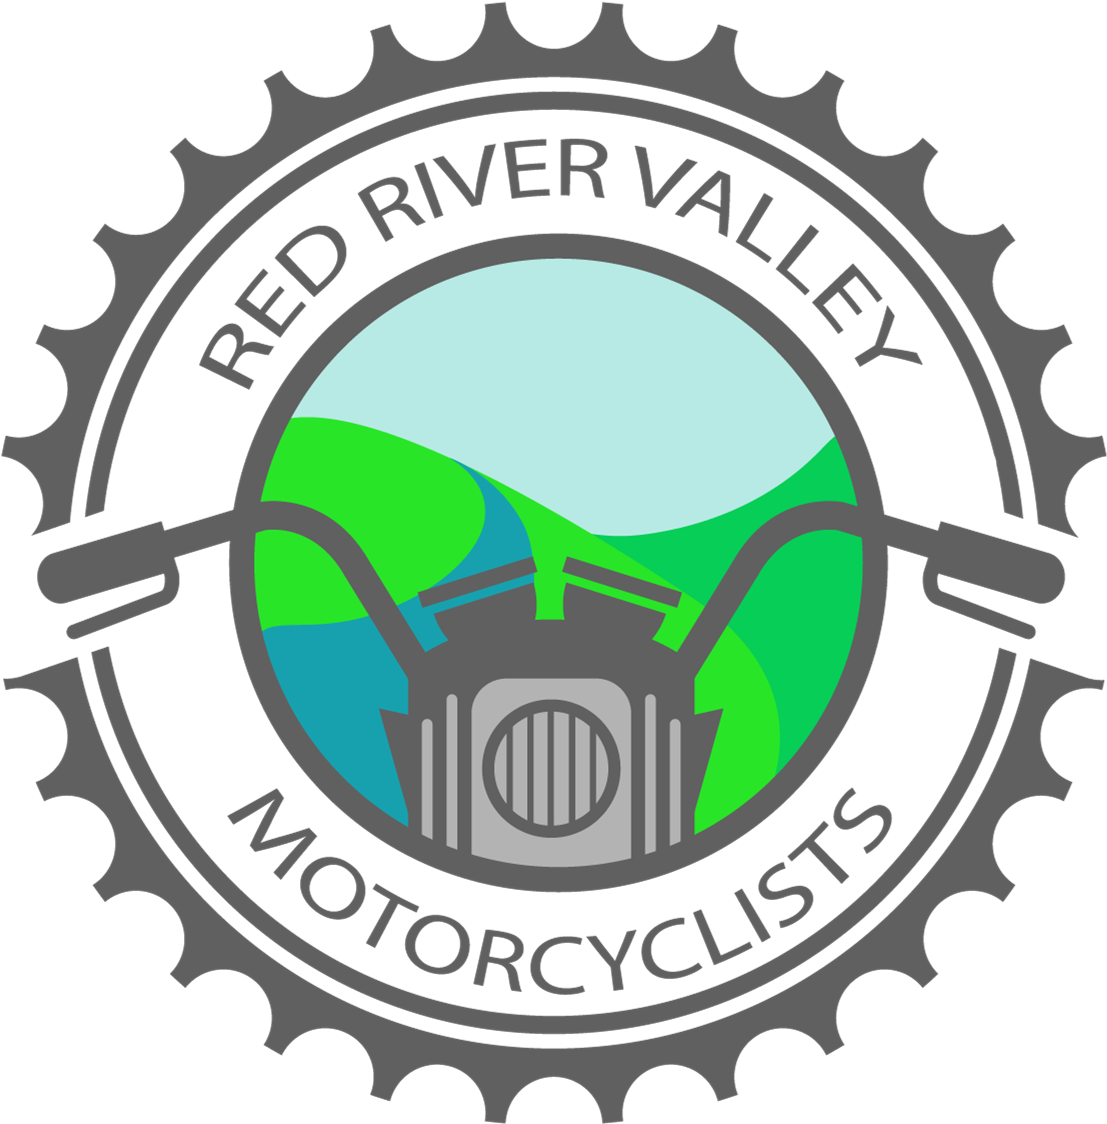 Red River Valley Motorcyclists - Craft Beer Logo Sticker (1215x1221)